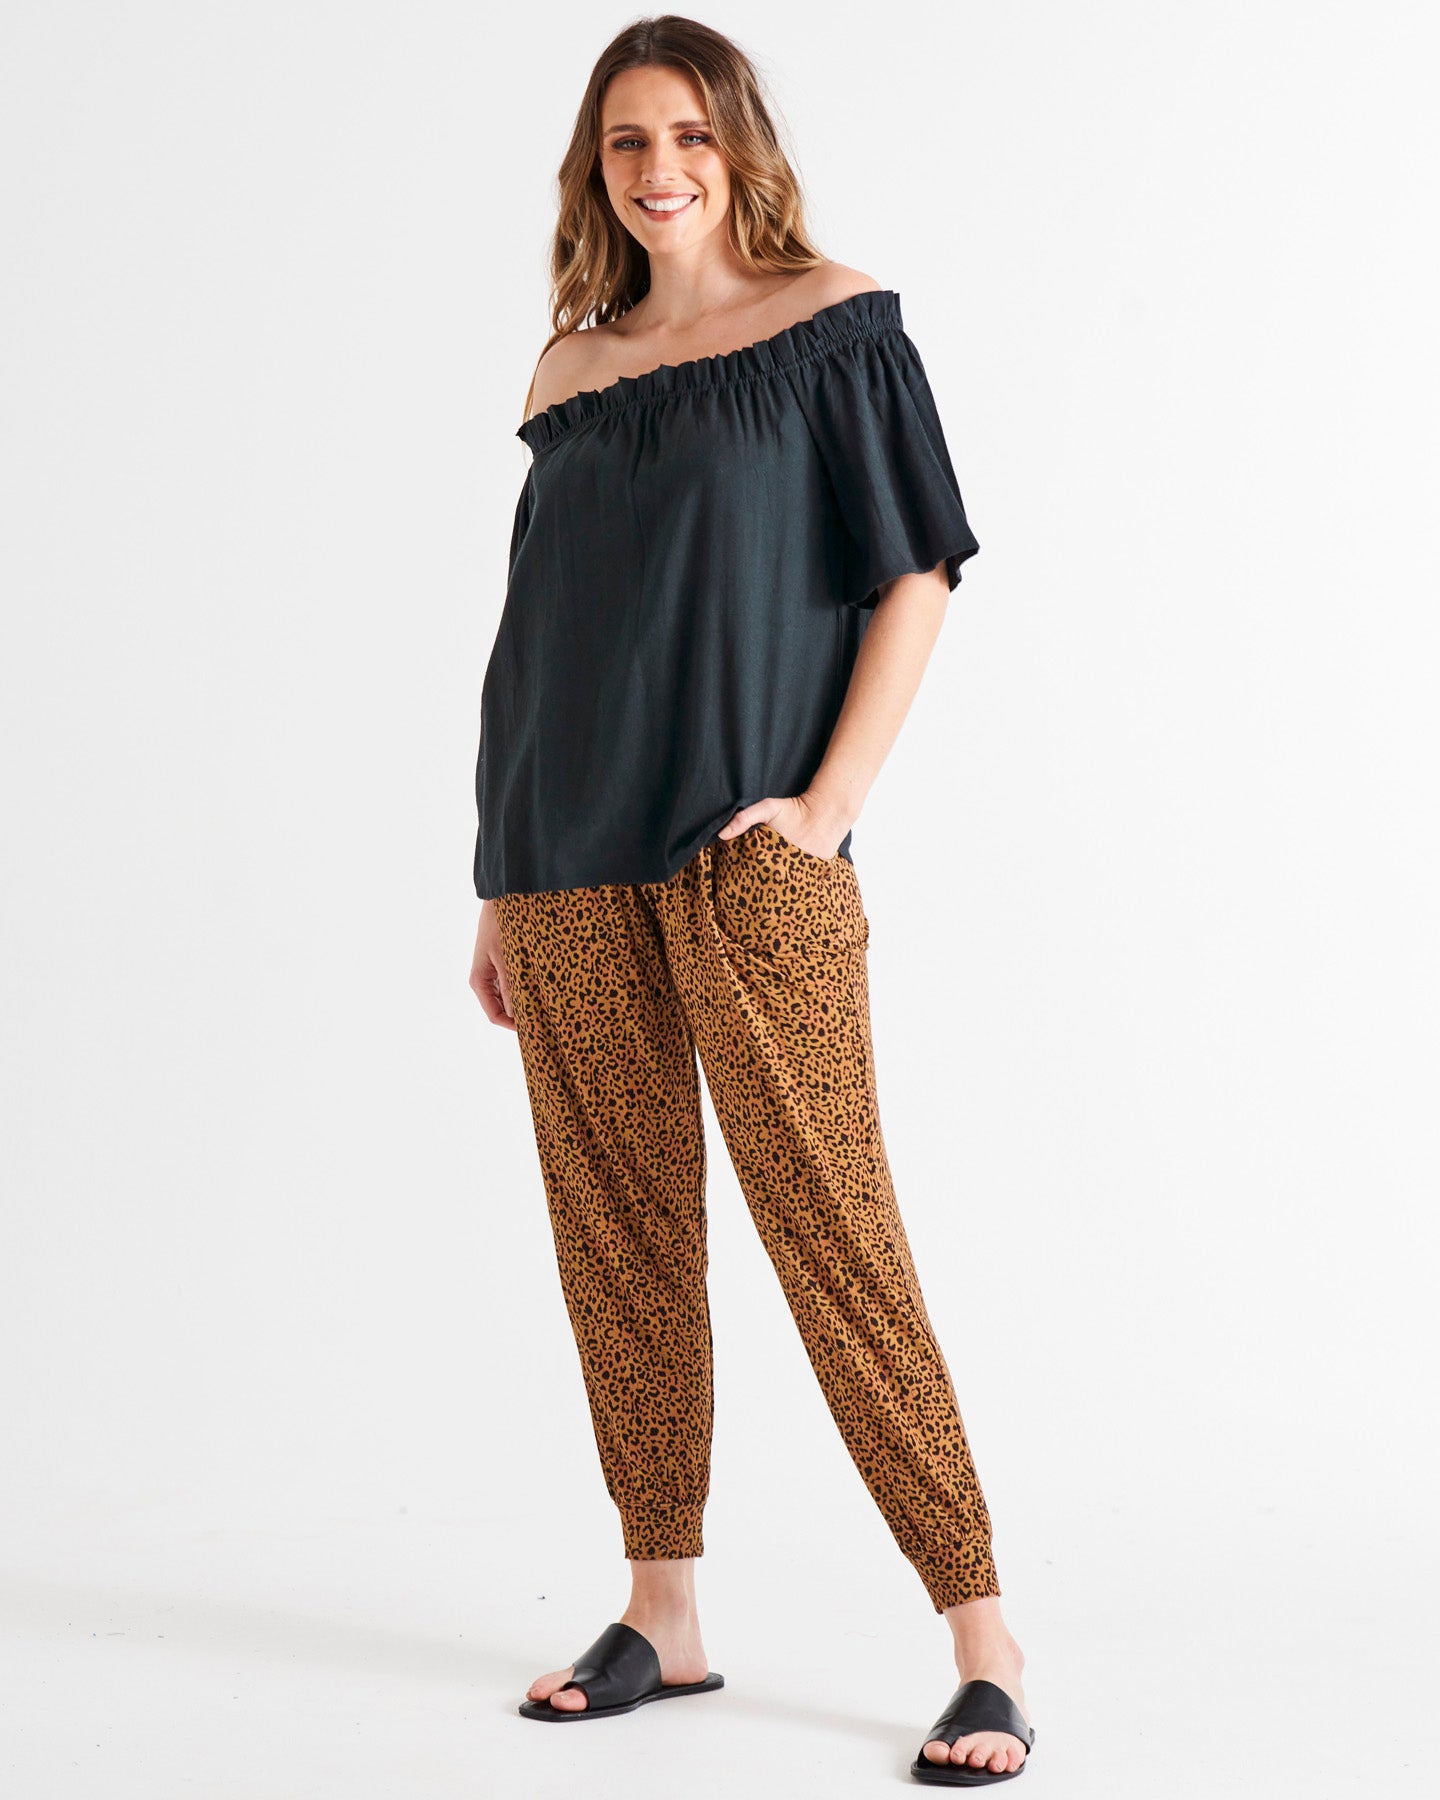 Paris Mid-Rise Stretchy Loose Fitting Jogger Pant - Wild Leopard Print